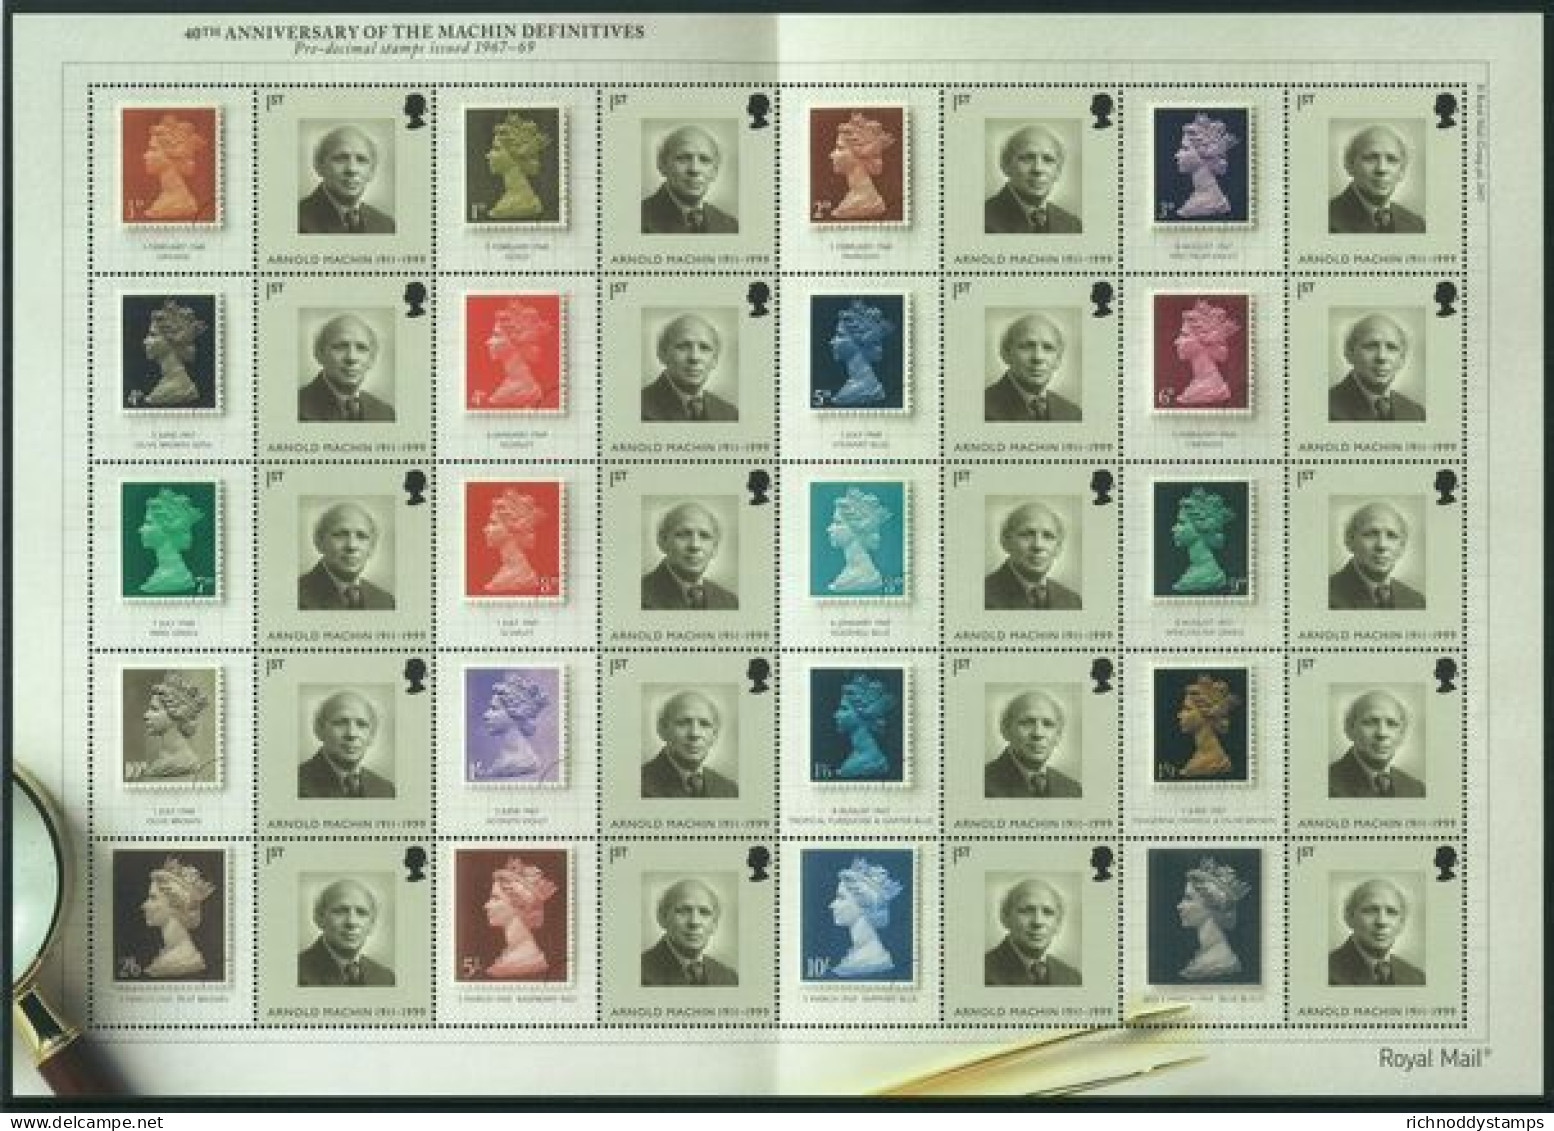 2007 40th Anniversay Of The First Machin Definitive Smilers Sheet Unmounted Mint.  - Francobolli Personalizzati